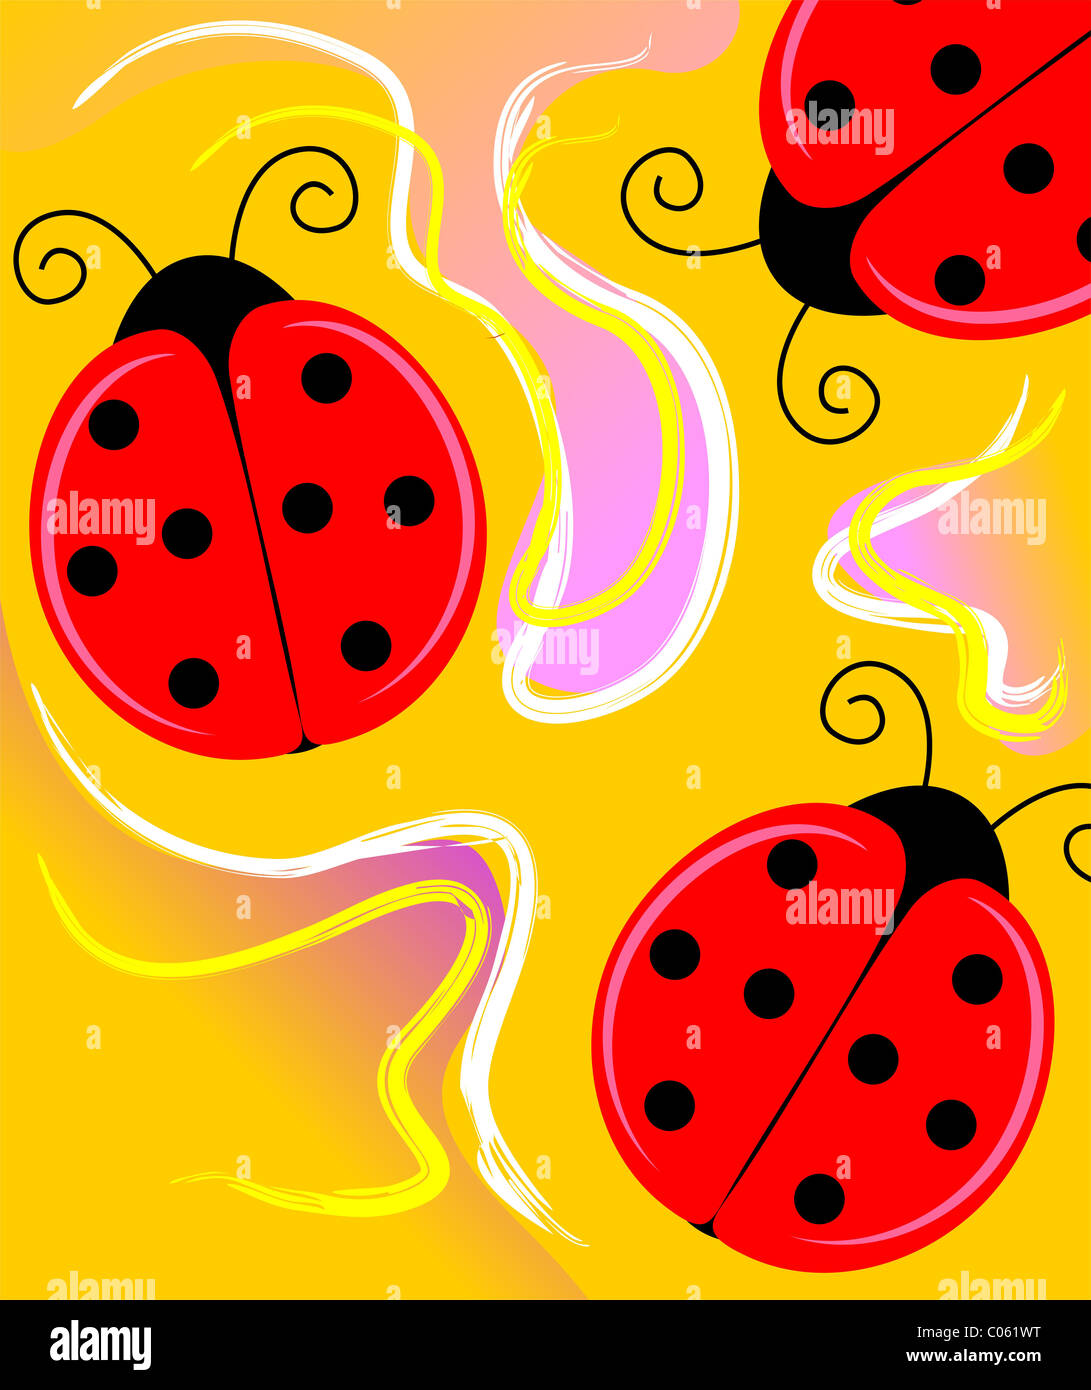 Digital painting of three ladybirds. The artist is feeling the sense of beauty and togetherness of the ladybirds. Stock Photo